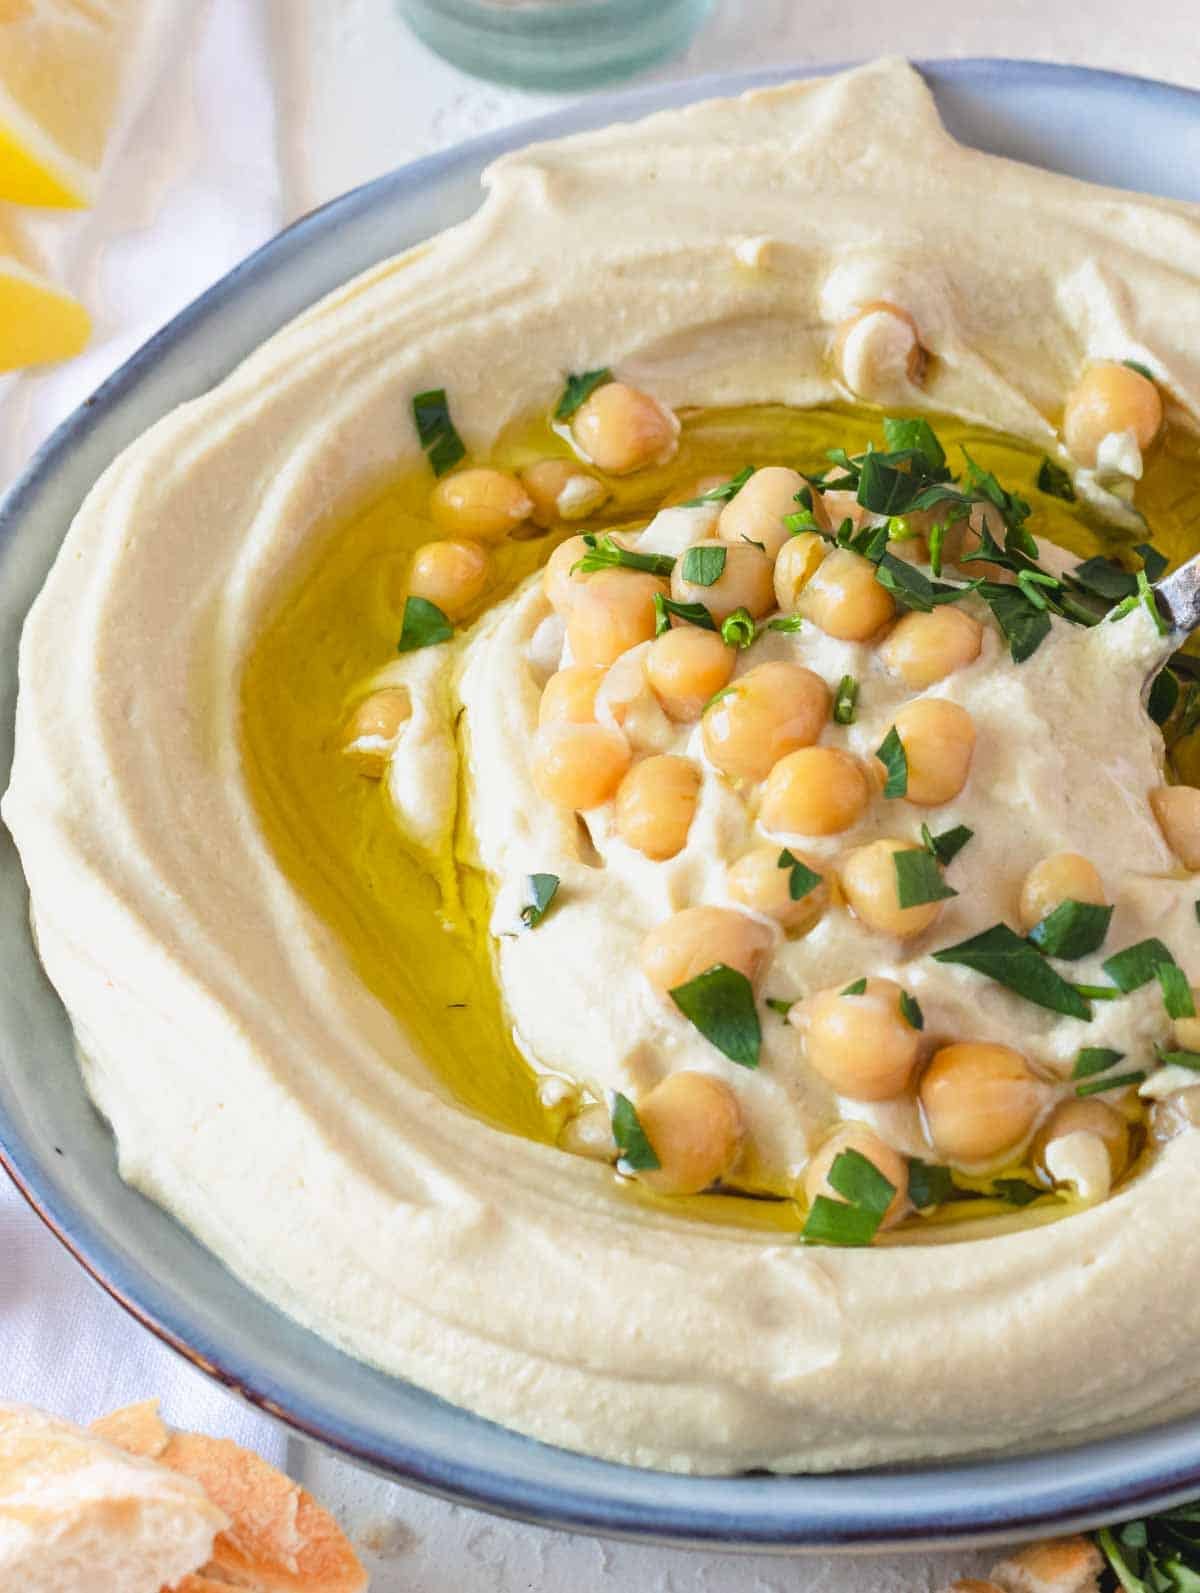 Hummus recipe on a plate with parsley